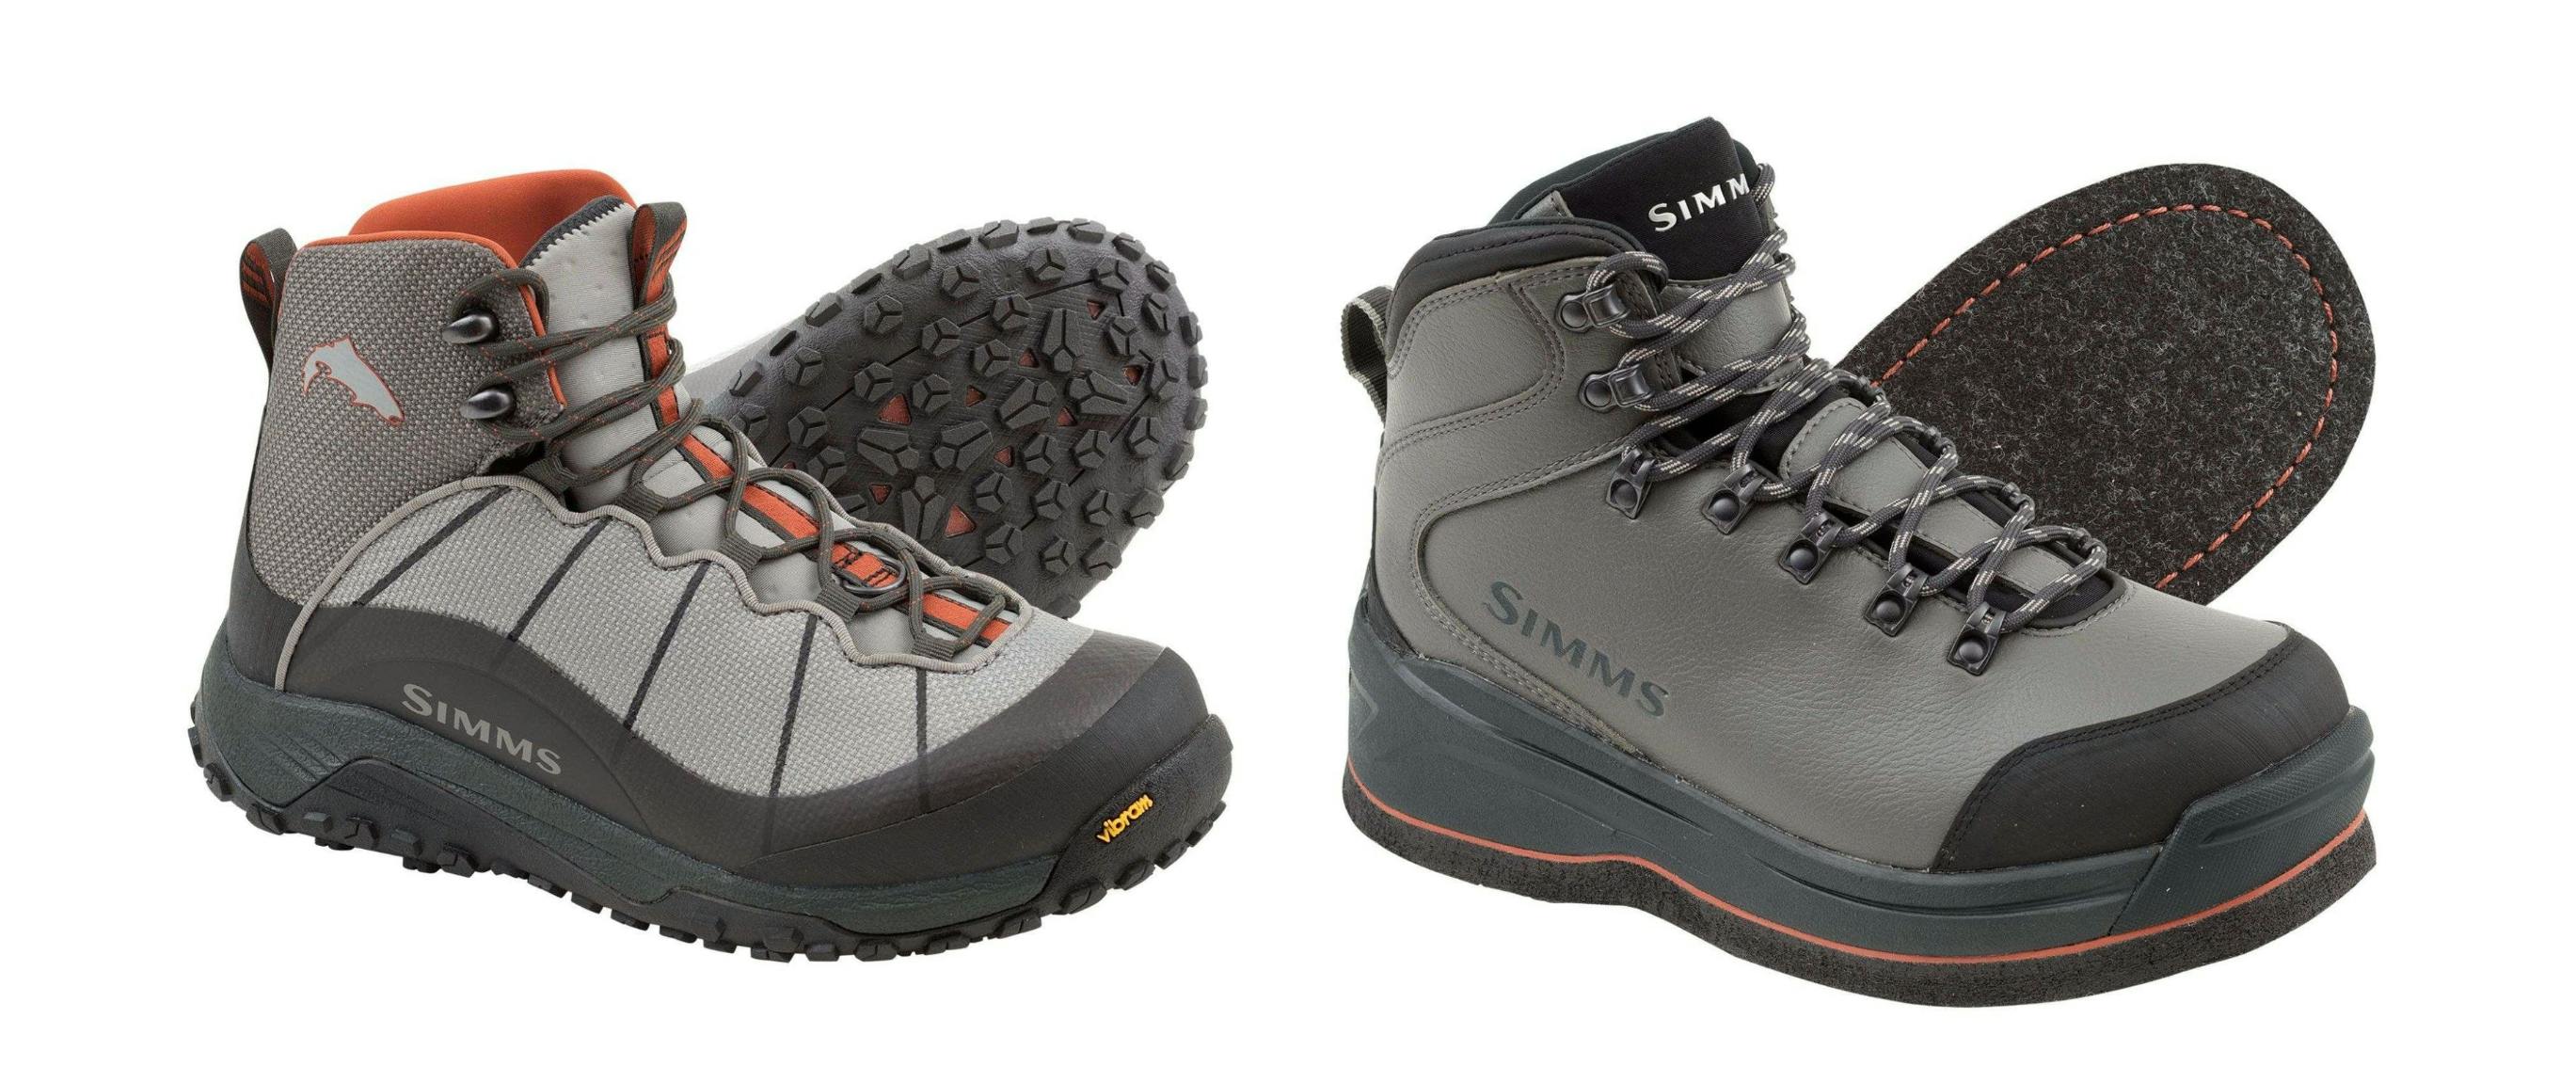 Product image of the Simms Women's Flyweight Boot and the Simms Women's Freestone Boot.